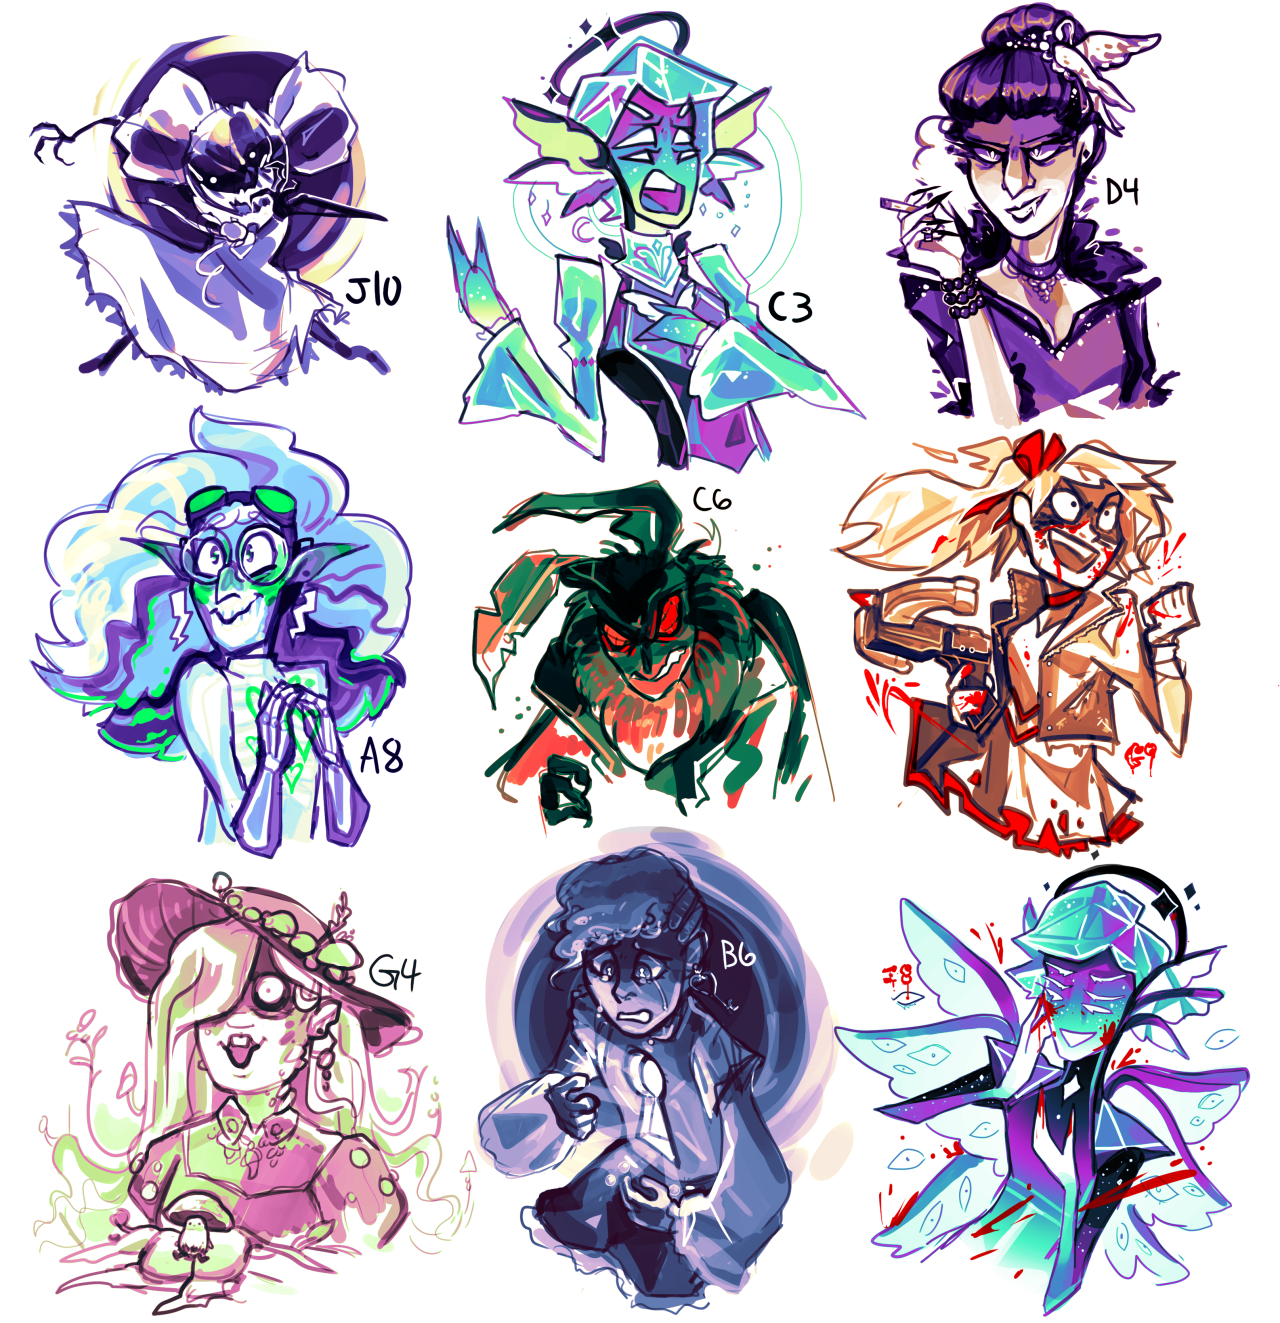 RP discord helped me to beat my artblock by picking out some character expressions off a maymay for me to do, twas a blast \o/ #id post the meme here but  #i literally never post about my ocs lol  #might still do it for fanart reason if nothing else? #artsy whispers #this was immensely satisfying to do and somehow reawoke my inner desire to make a webcomic  #something about redrawing characters with lots of personality and keeping them recognizable while having poses and expressions fresh  #one of these days. one of these days i say #ginger vitis#prism phosphenes#odile tchaikovsky#xeno cherenkov#rowan carter#shirley young#shyloh moores#lorna babcock